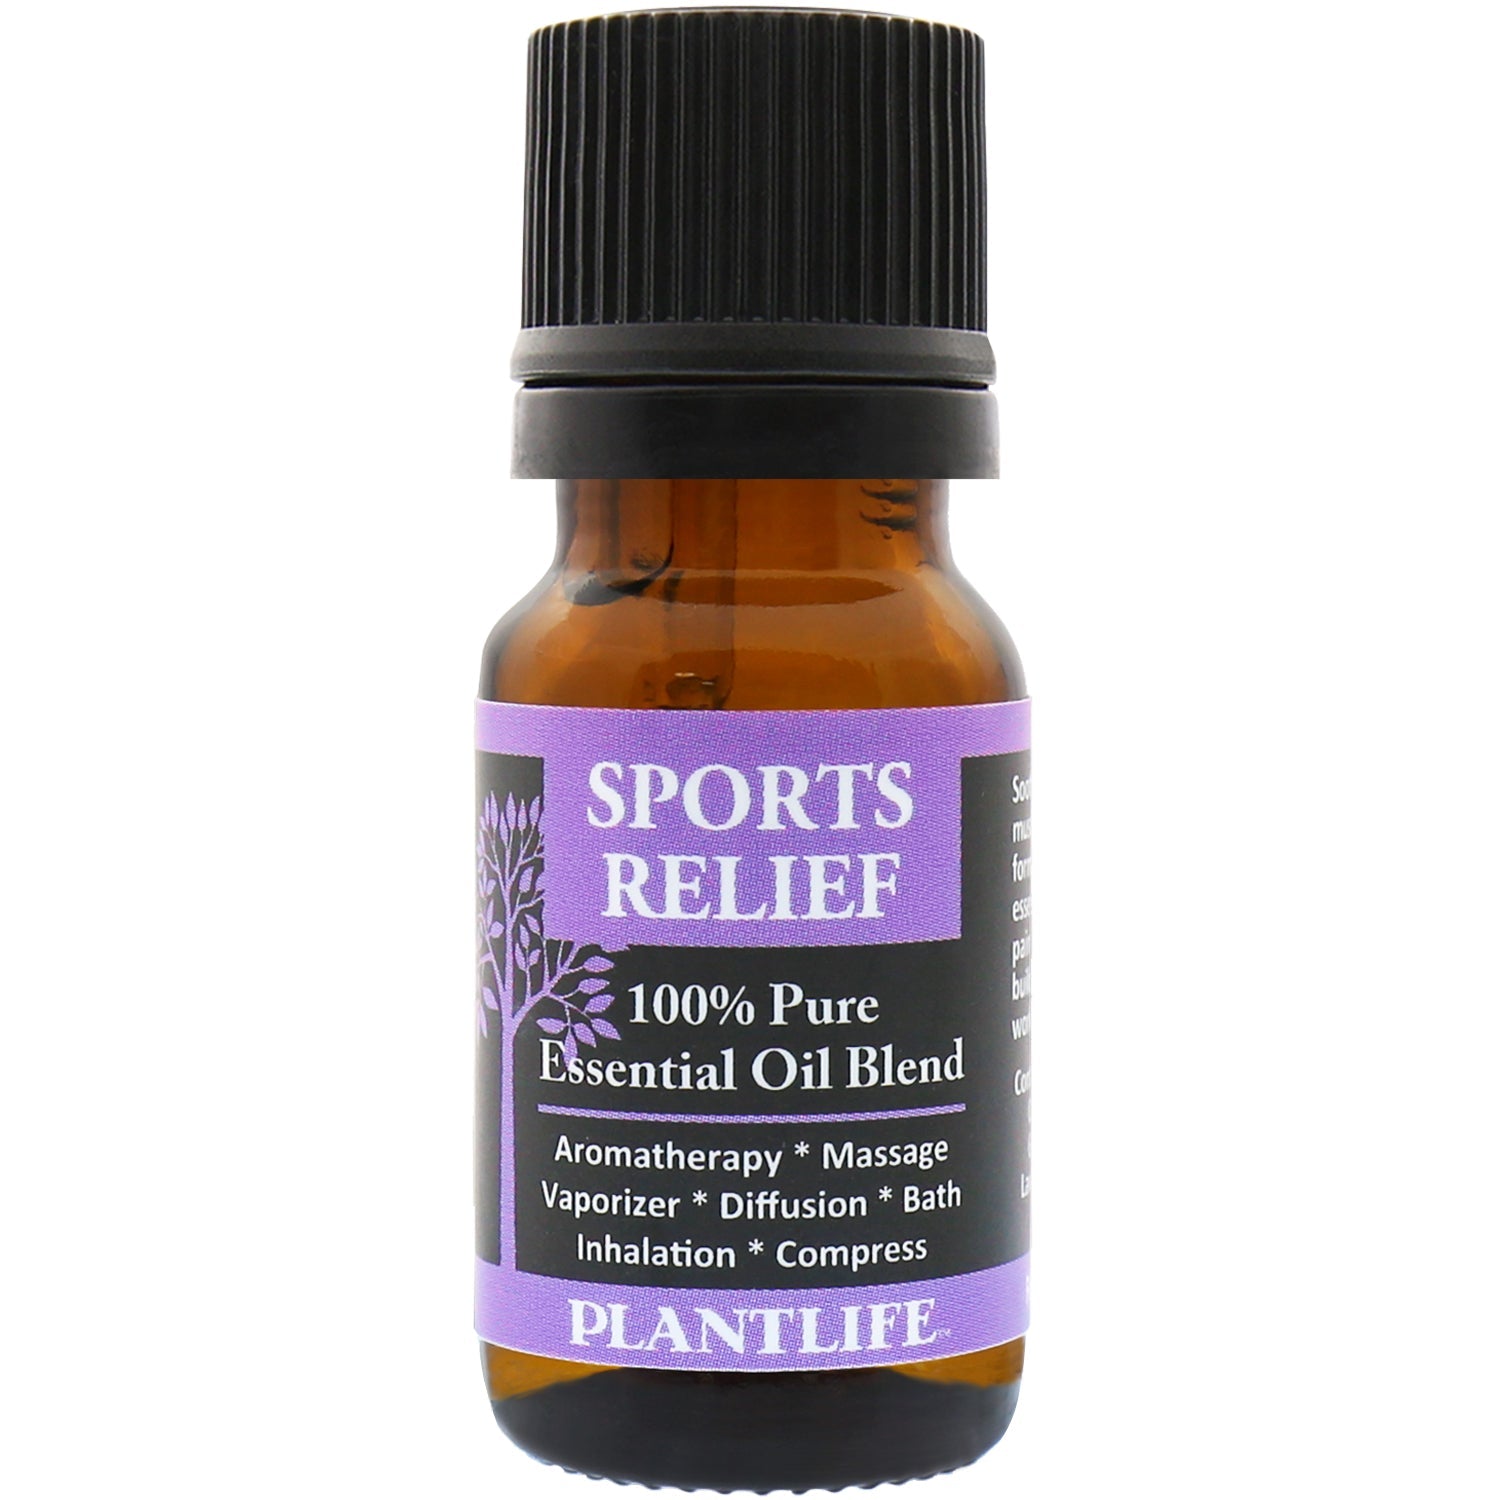 Sports Relief Essential Oil Blend